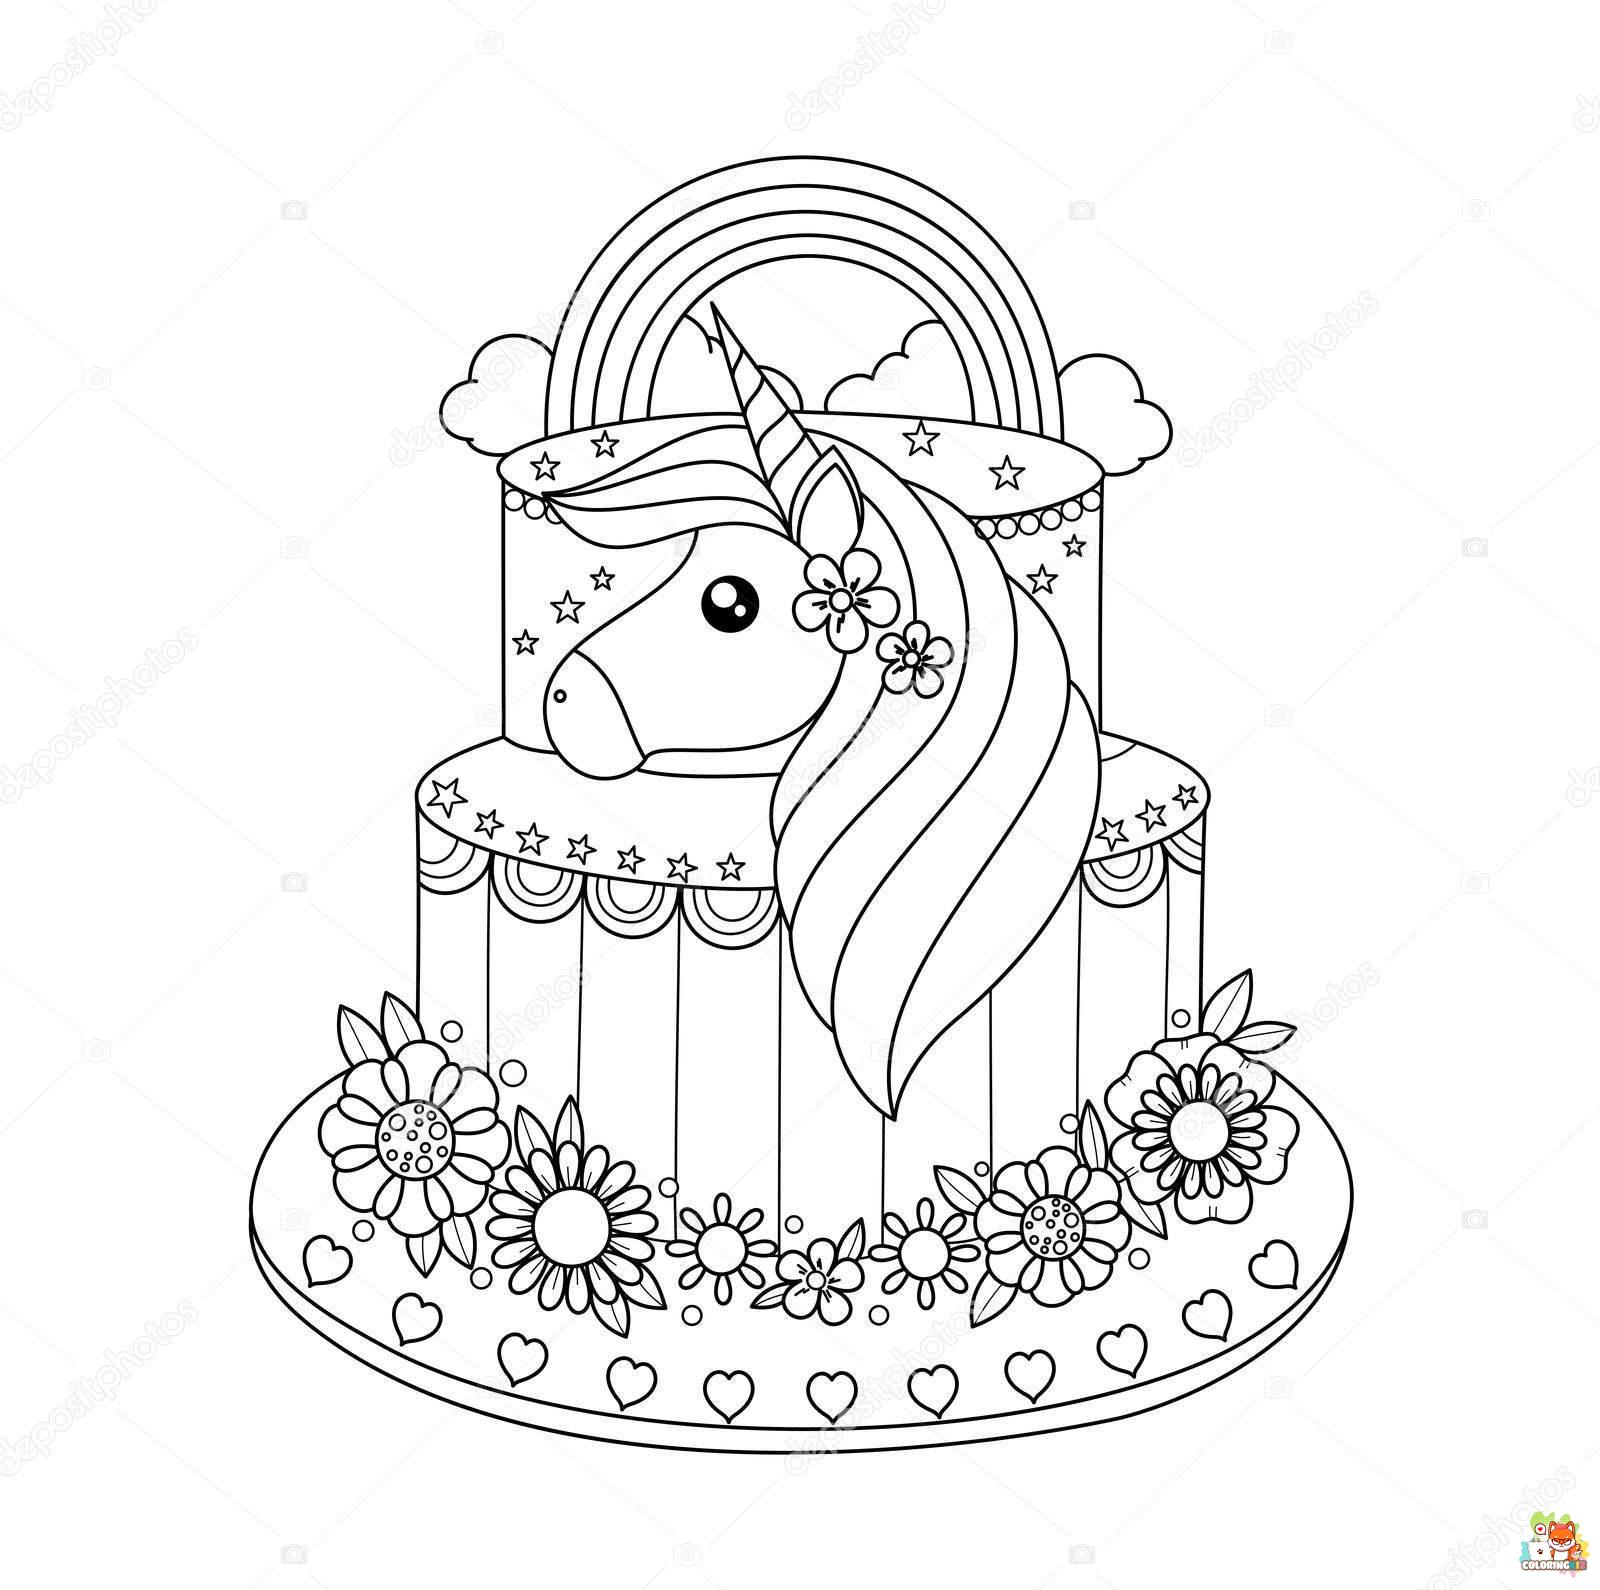 Unicorn Cake Coloring Pages 1